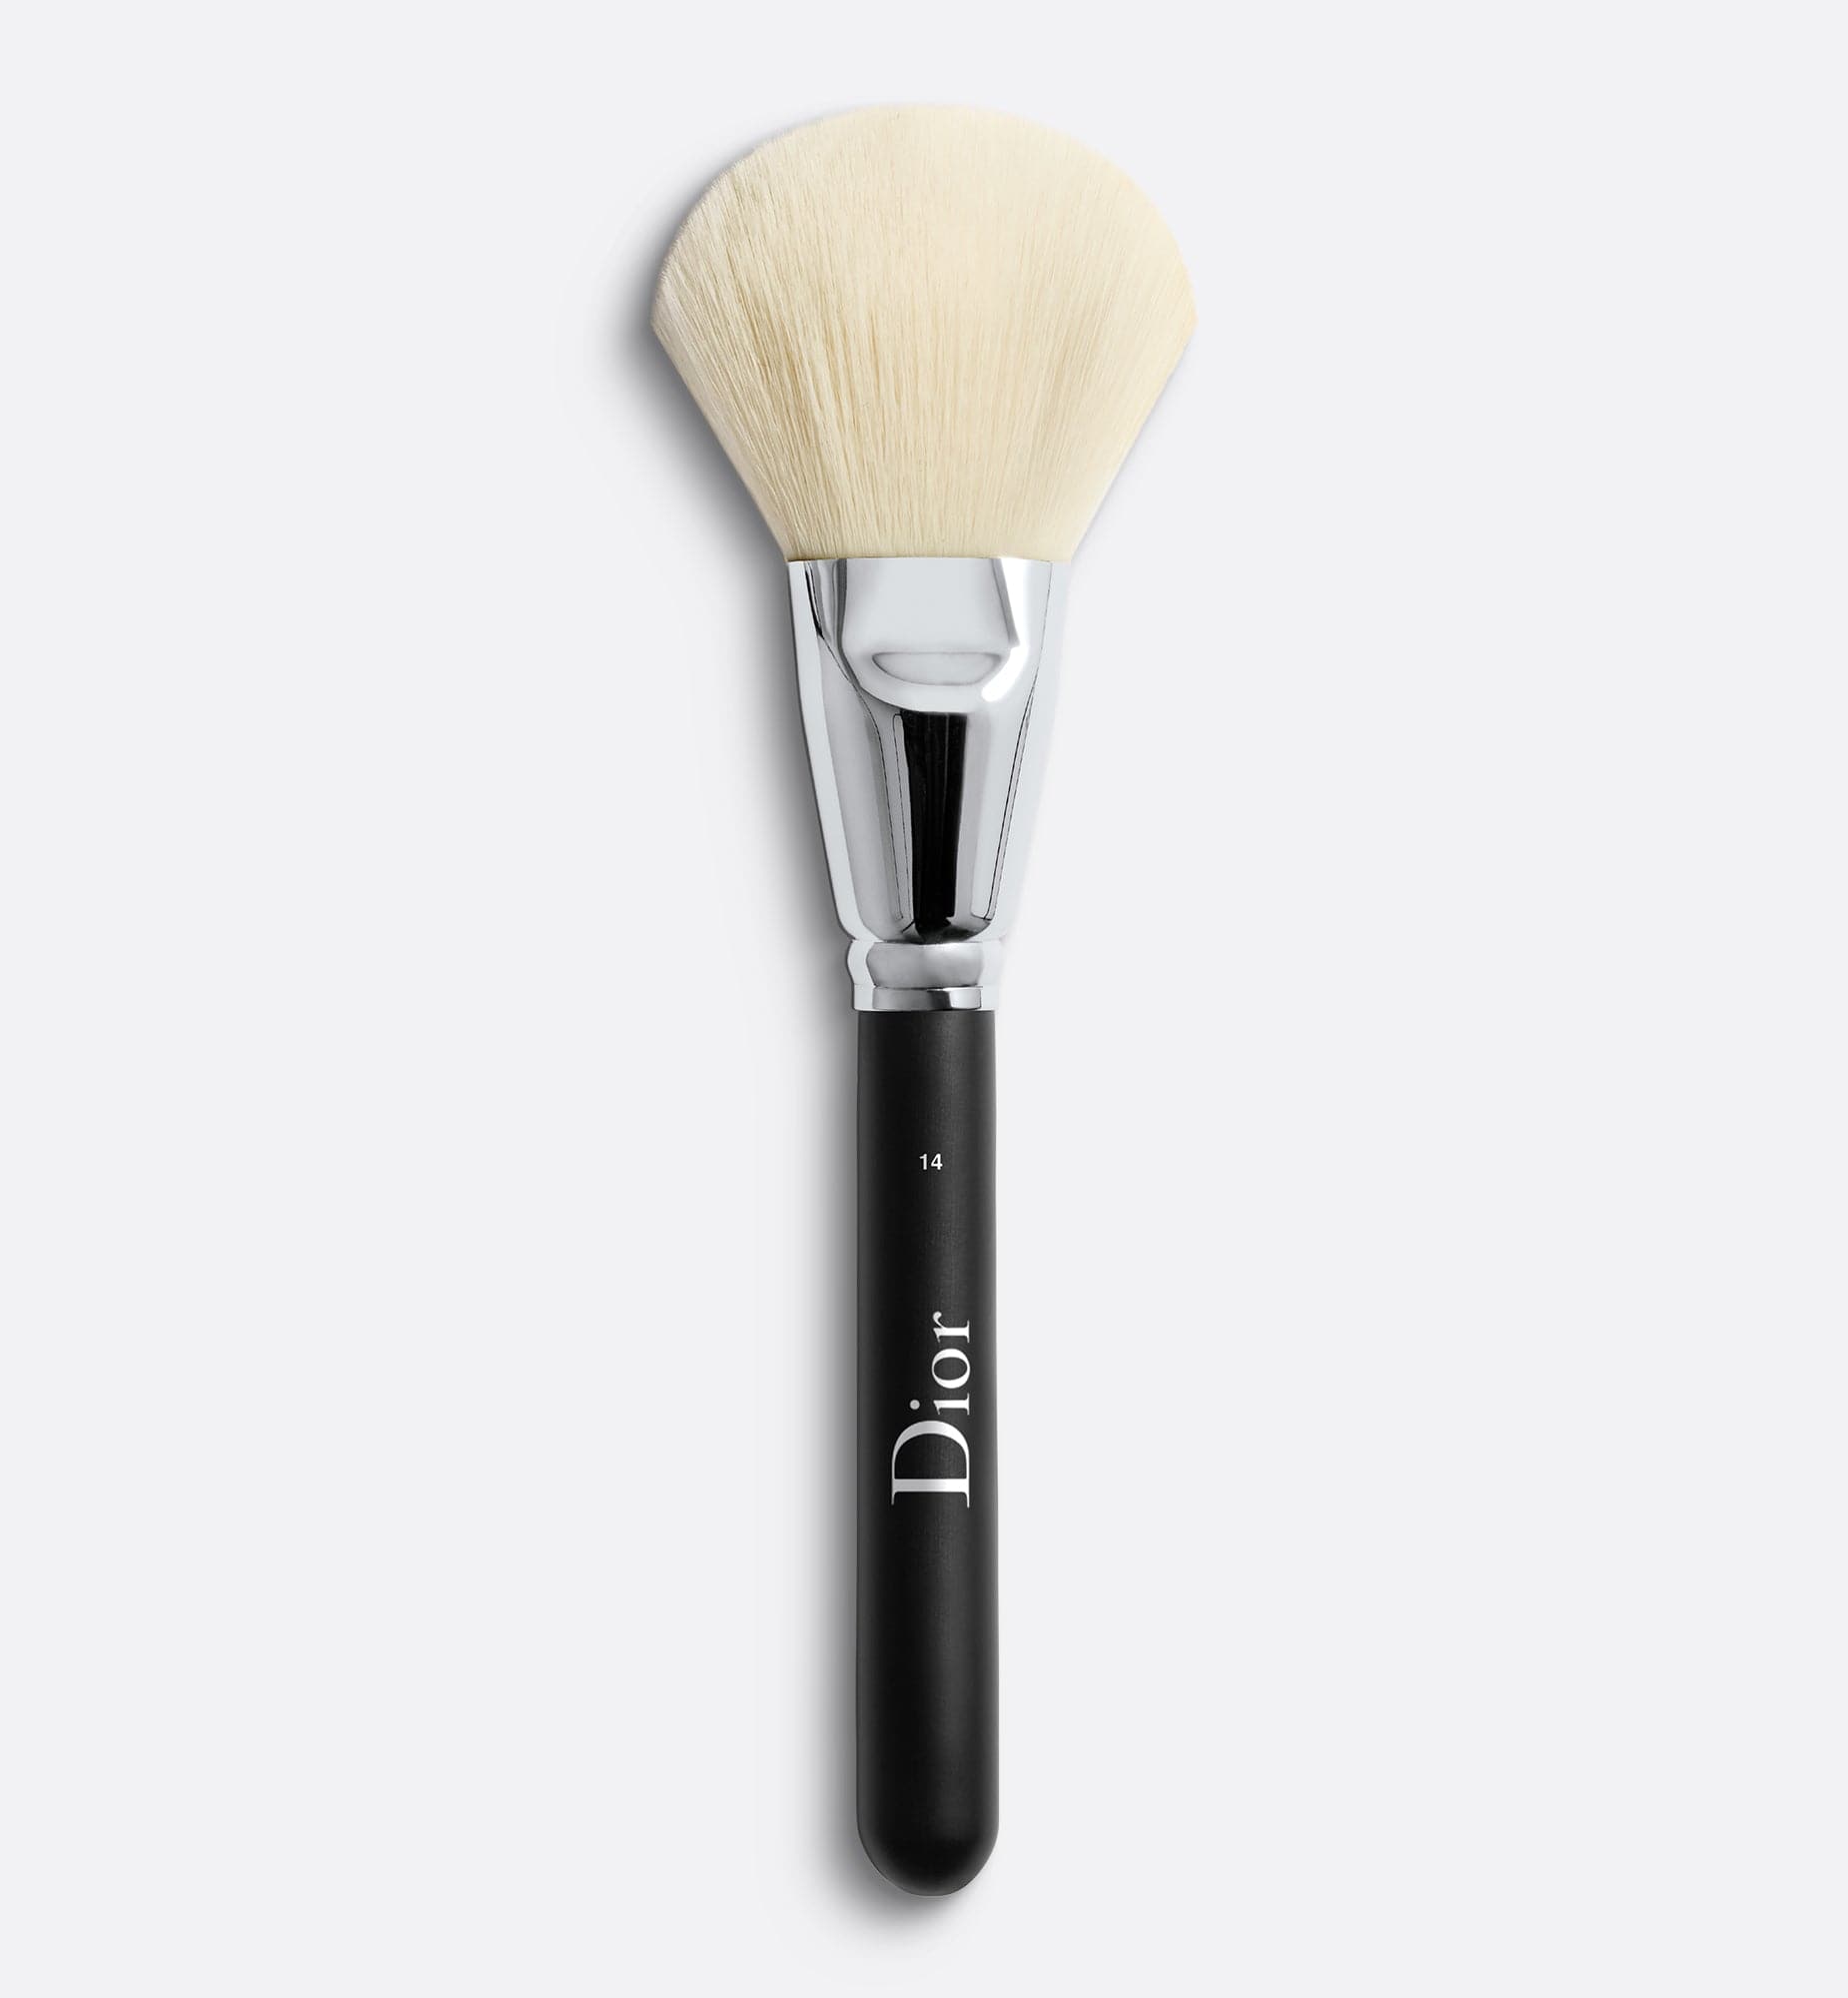 Dior Backstage Powder Brush N°14 | For Compact Powders and Powder Foundations